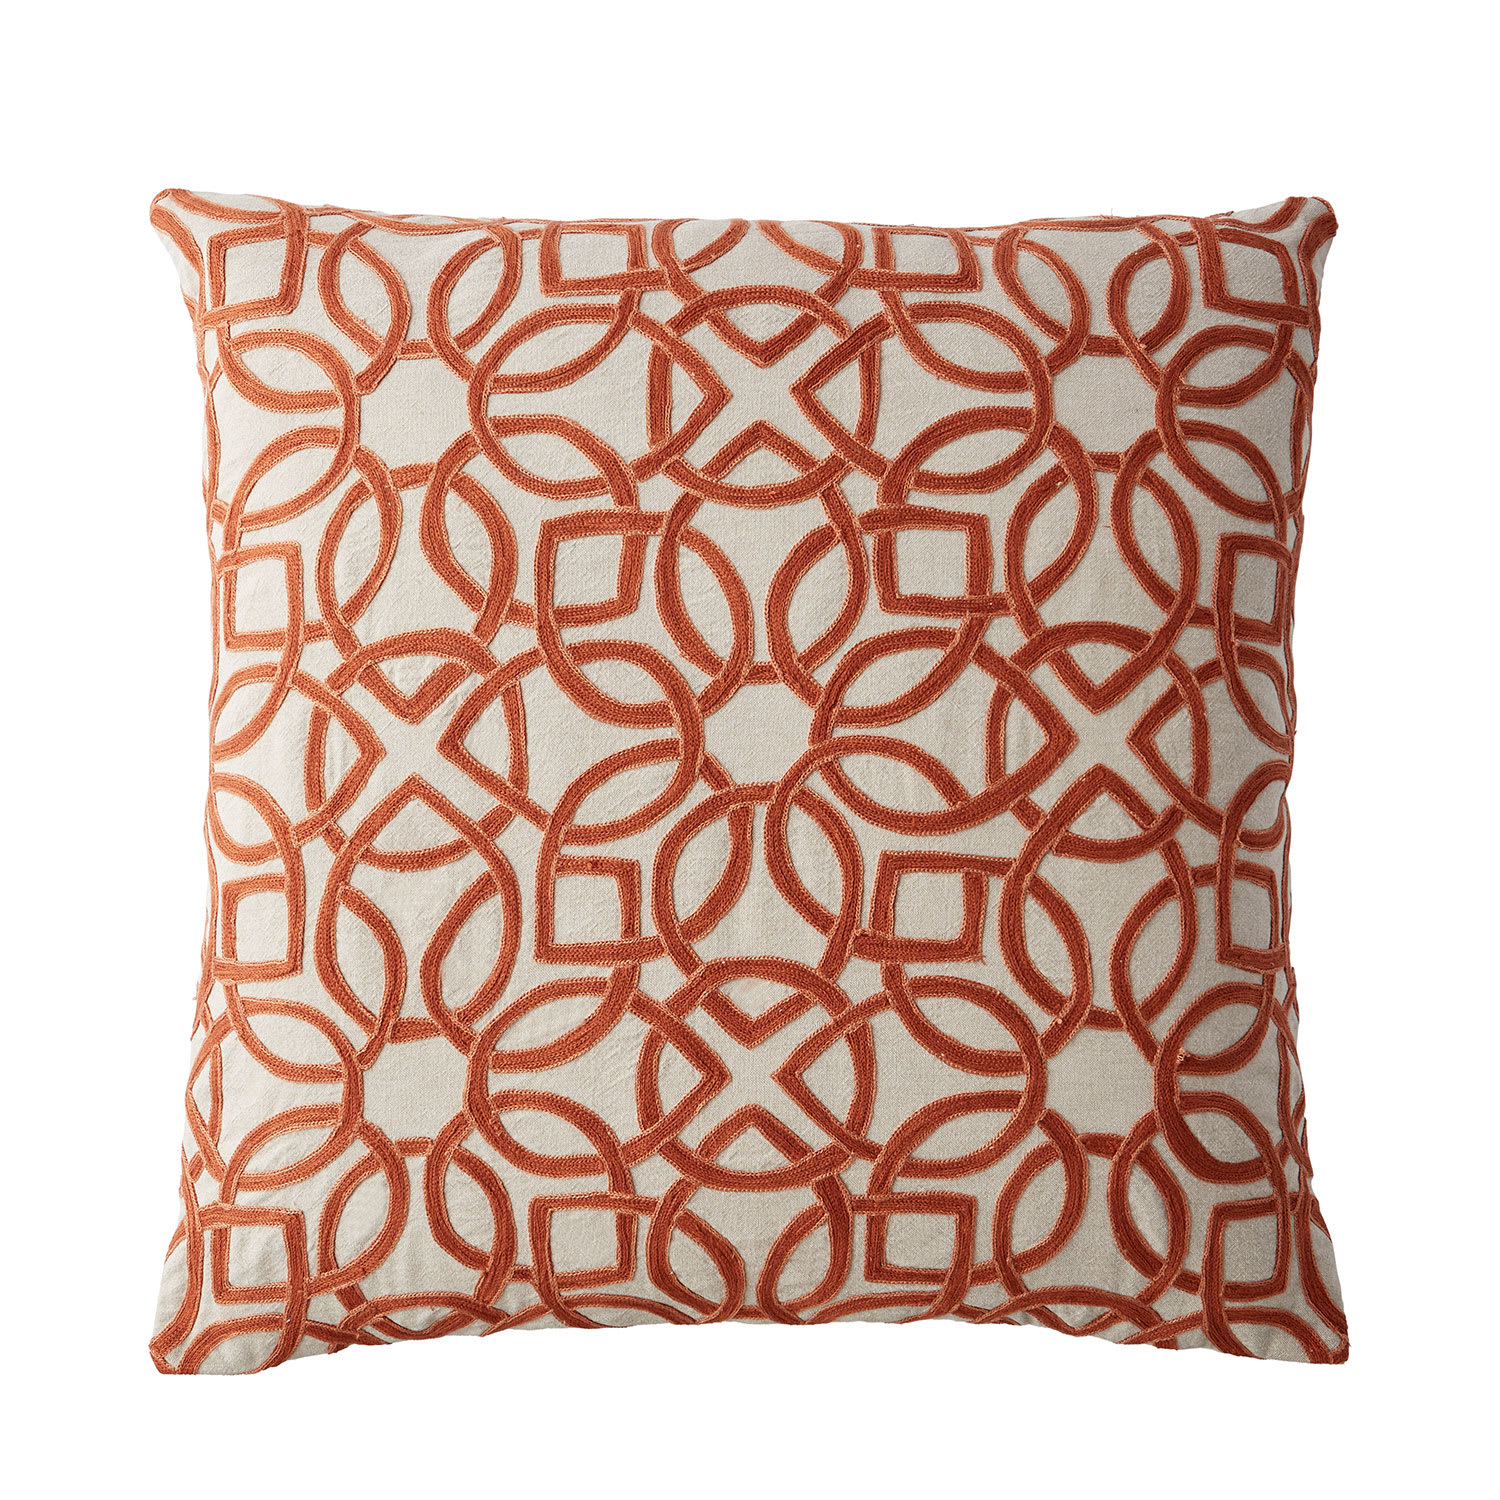 Multicolored Geo Embroidered Pillow Cover - Geo